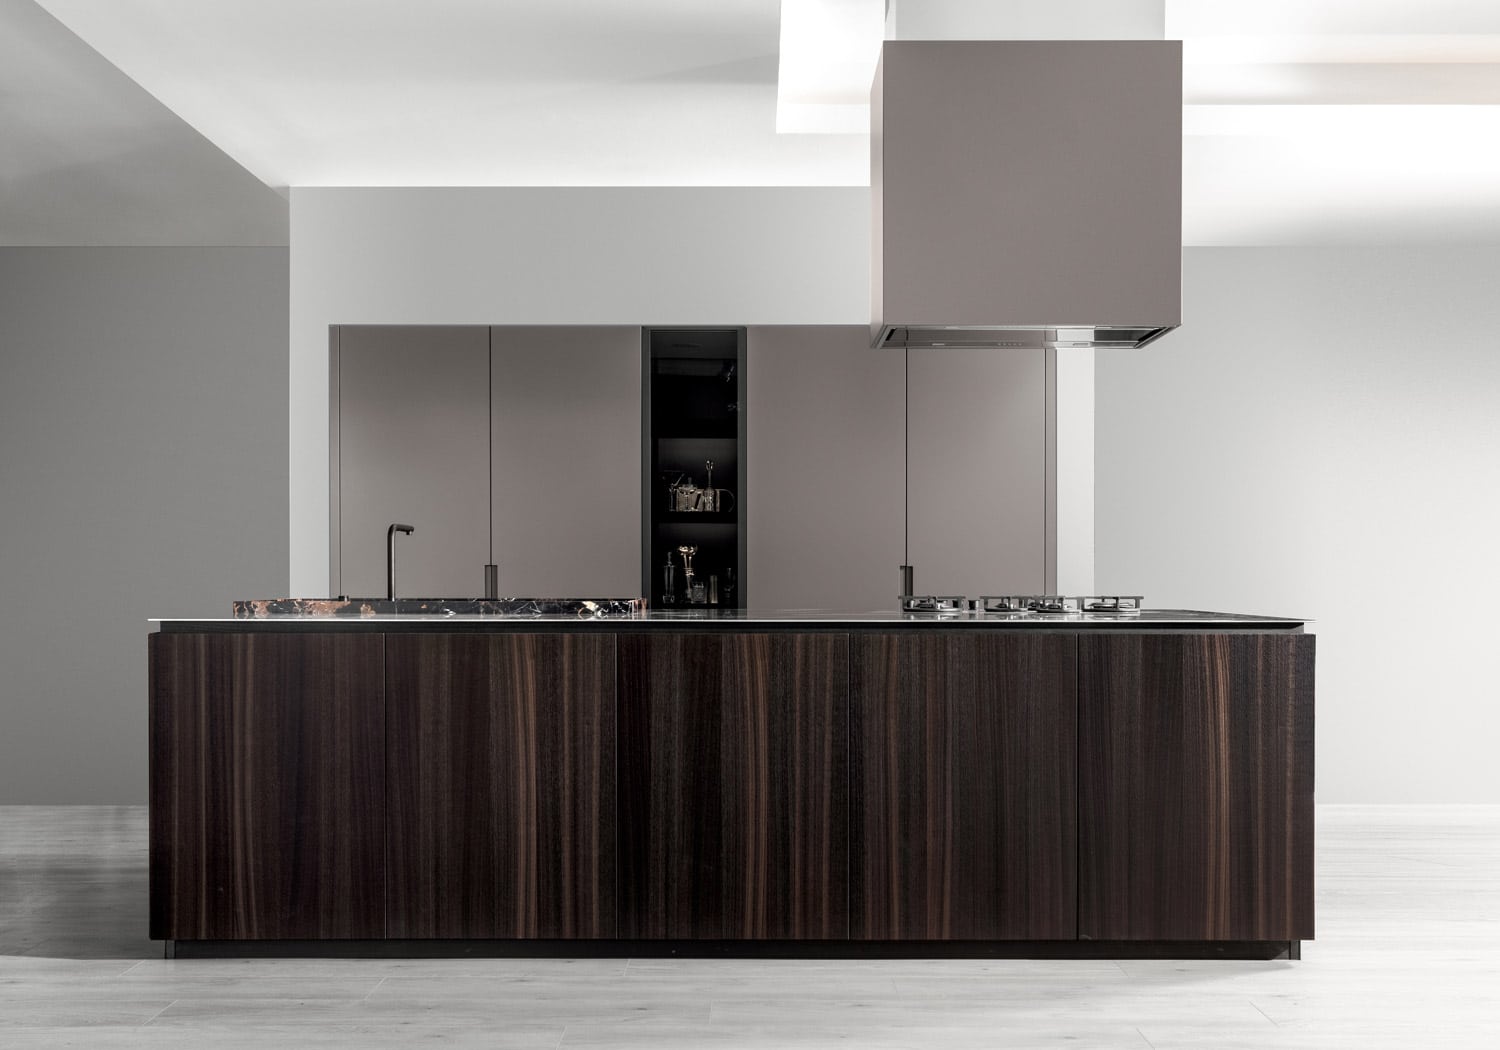 In this bespoke kitchen, clean lines enhance the contrast of materials (London Grey lacquer and Smoked Eucalyptus), which, in turn, give character to the design. 